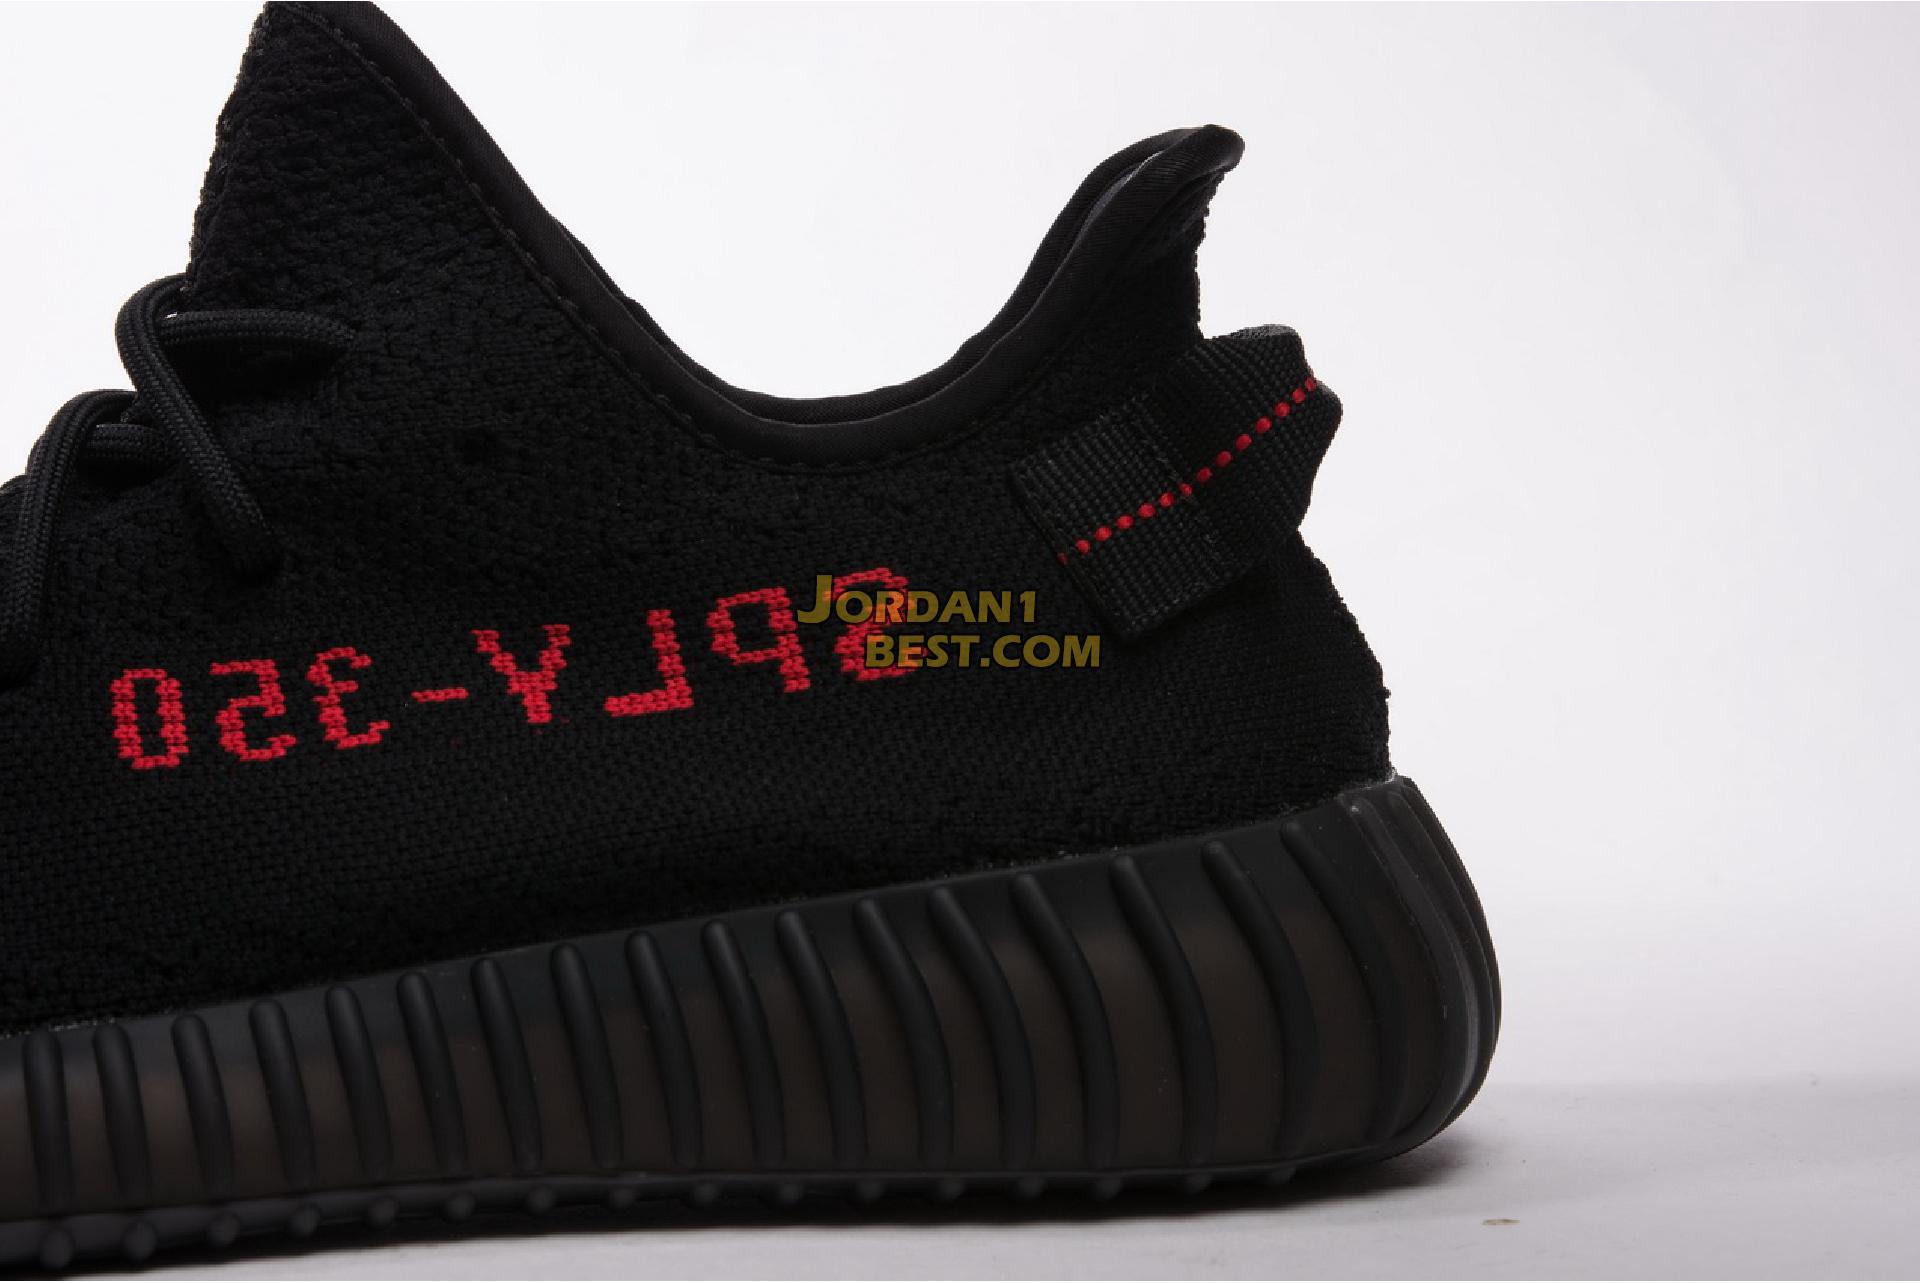 Adidas Yeezy Boost 350 V2 "Bred" CP9652